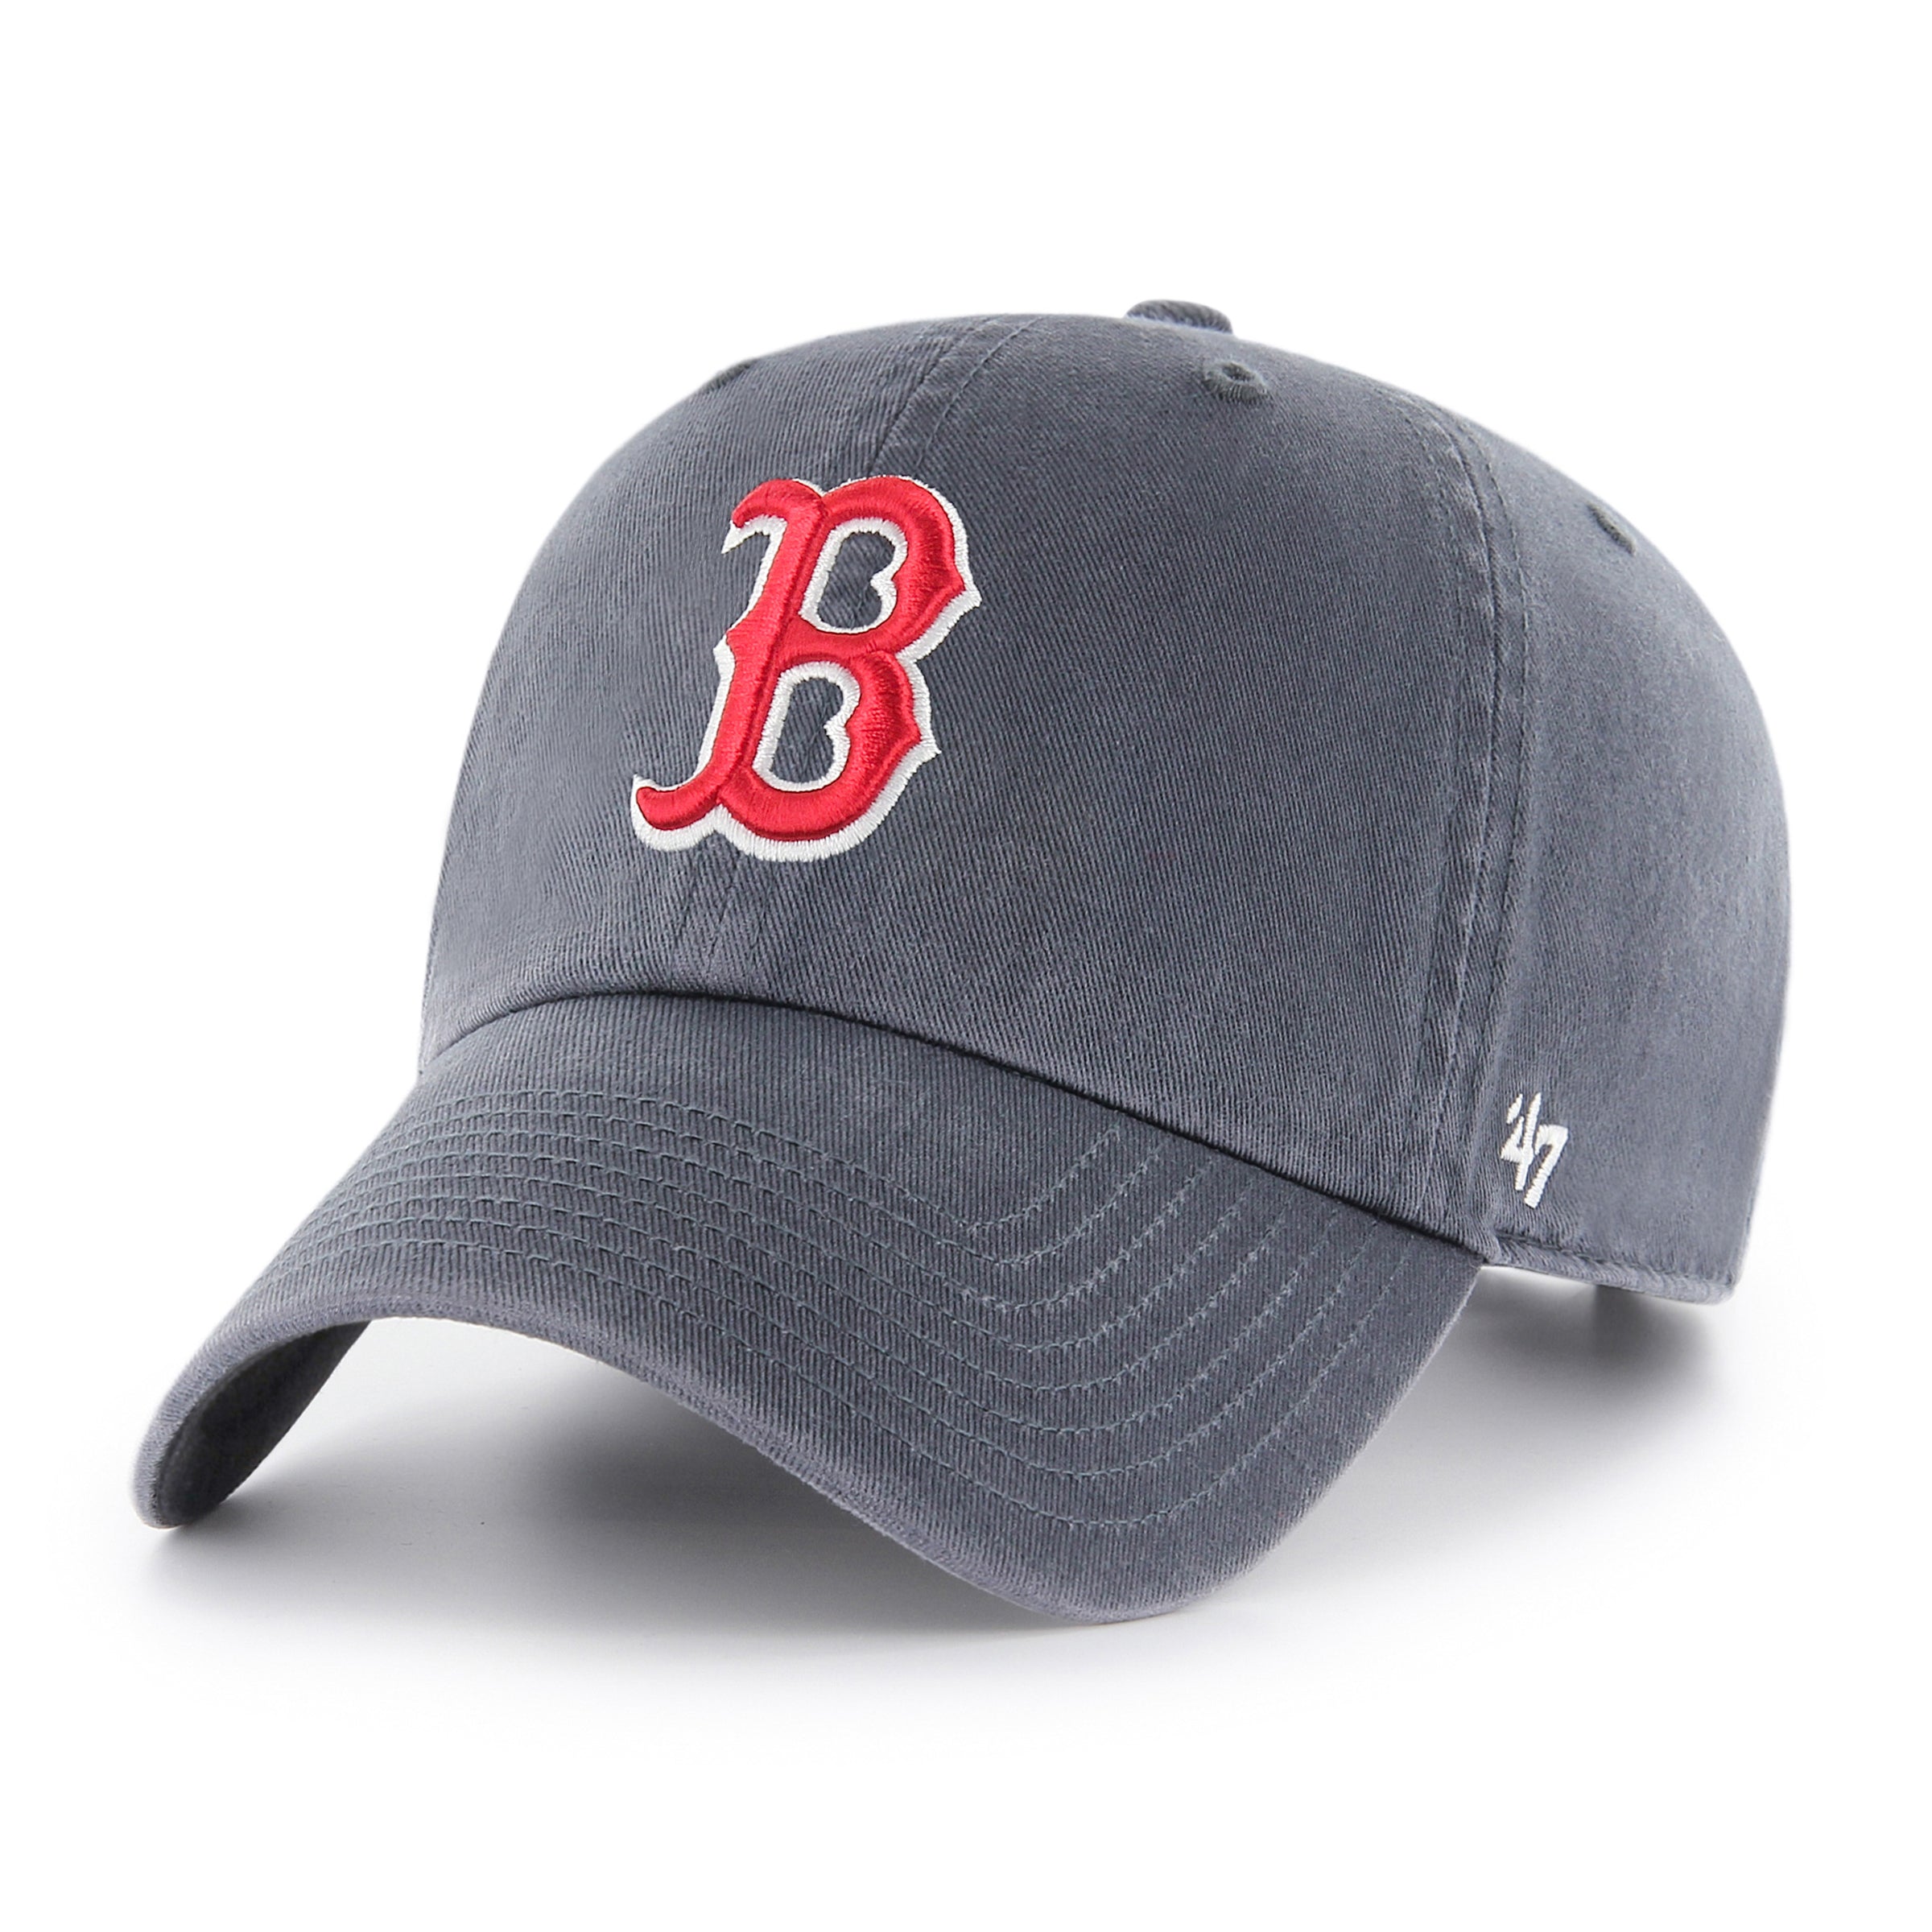  '47 Boston Red Sox 1976 Throwback Blue Clean Up Cap